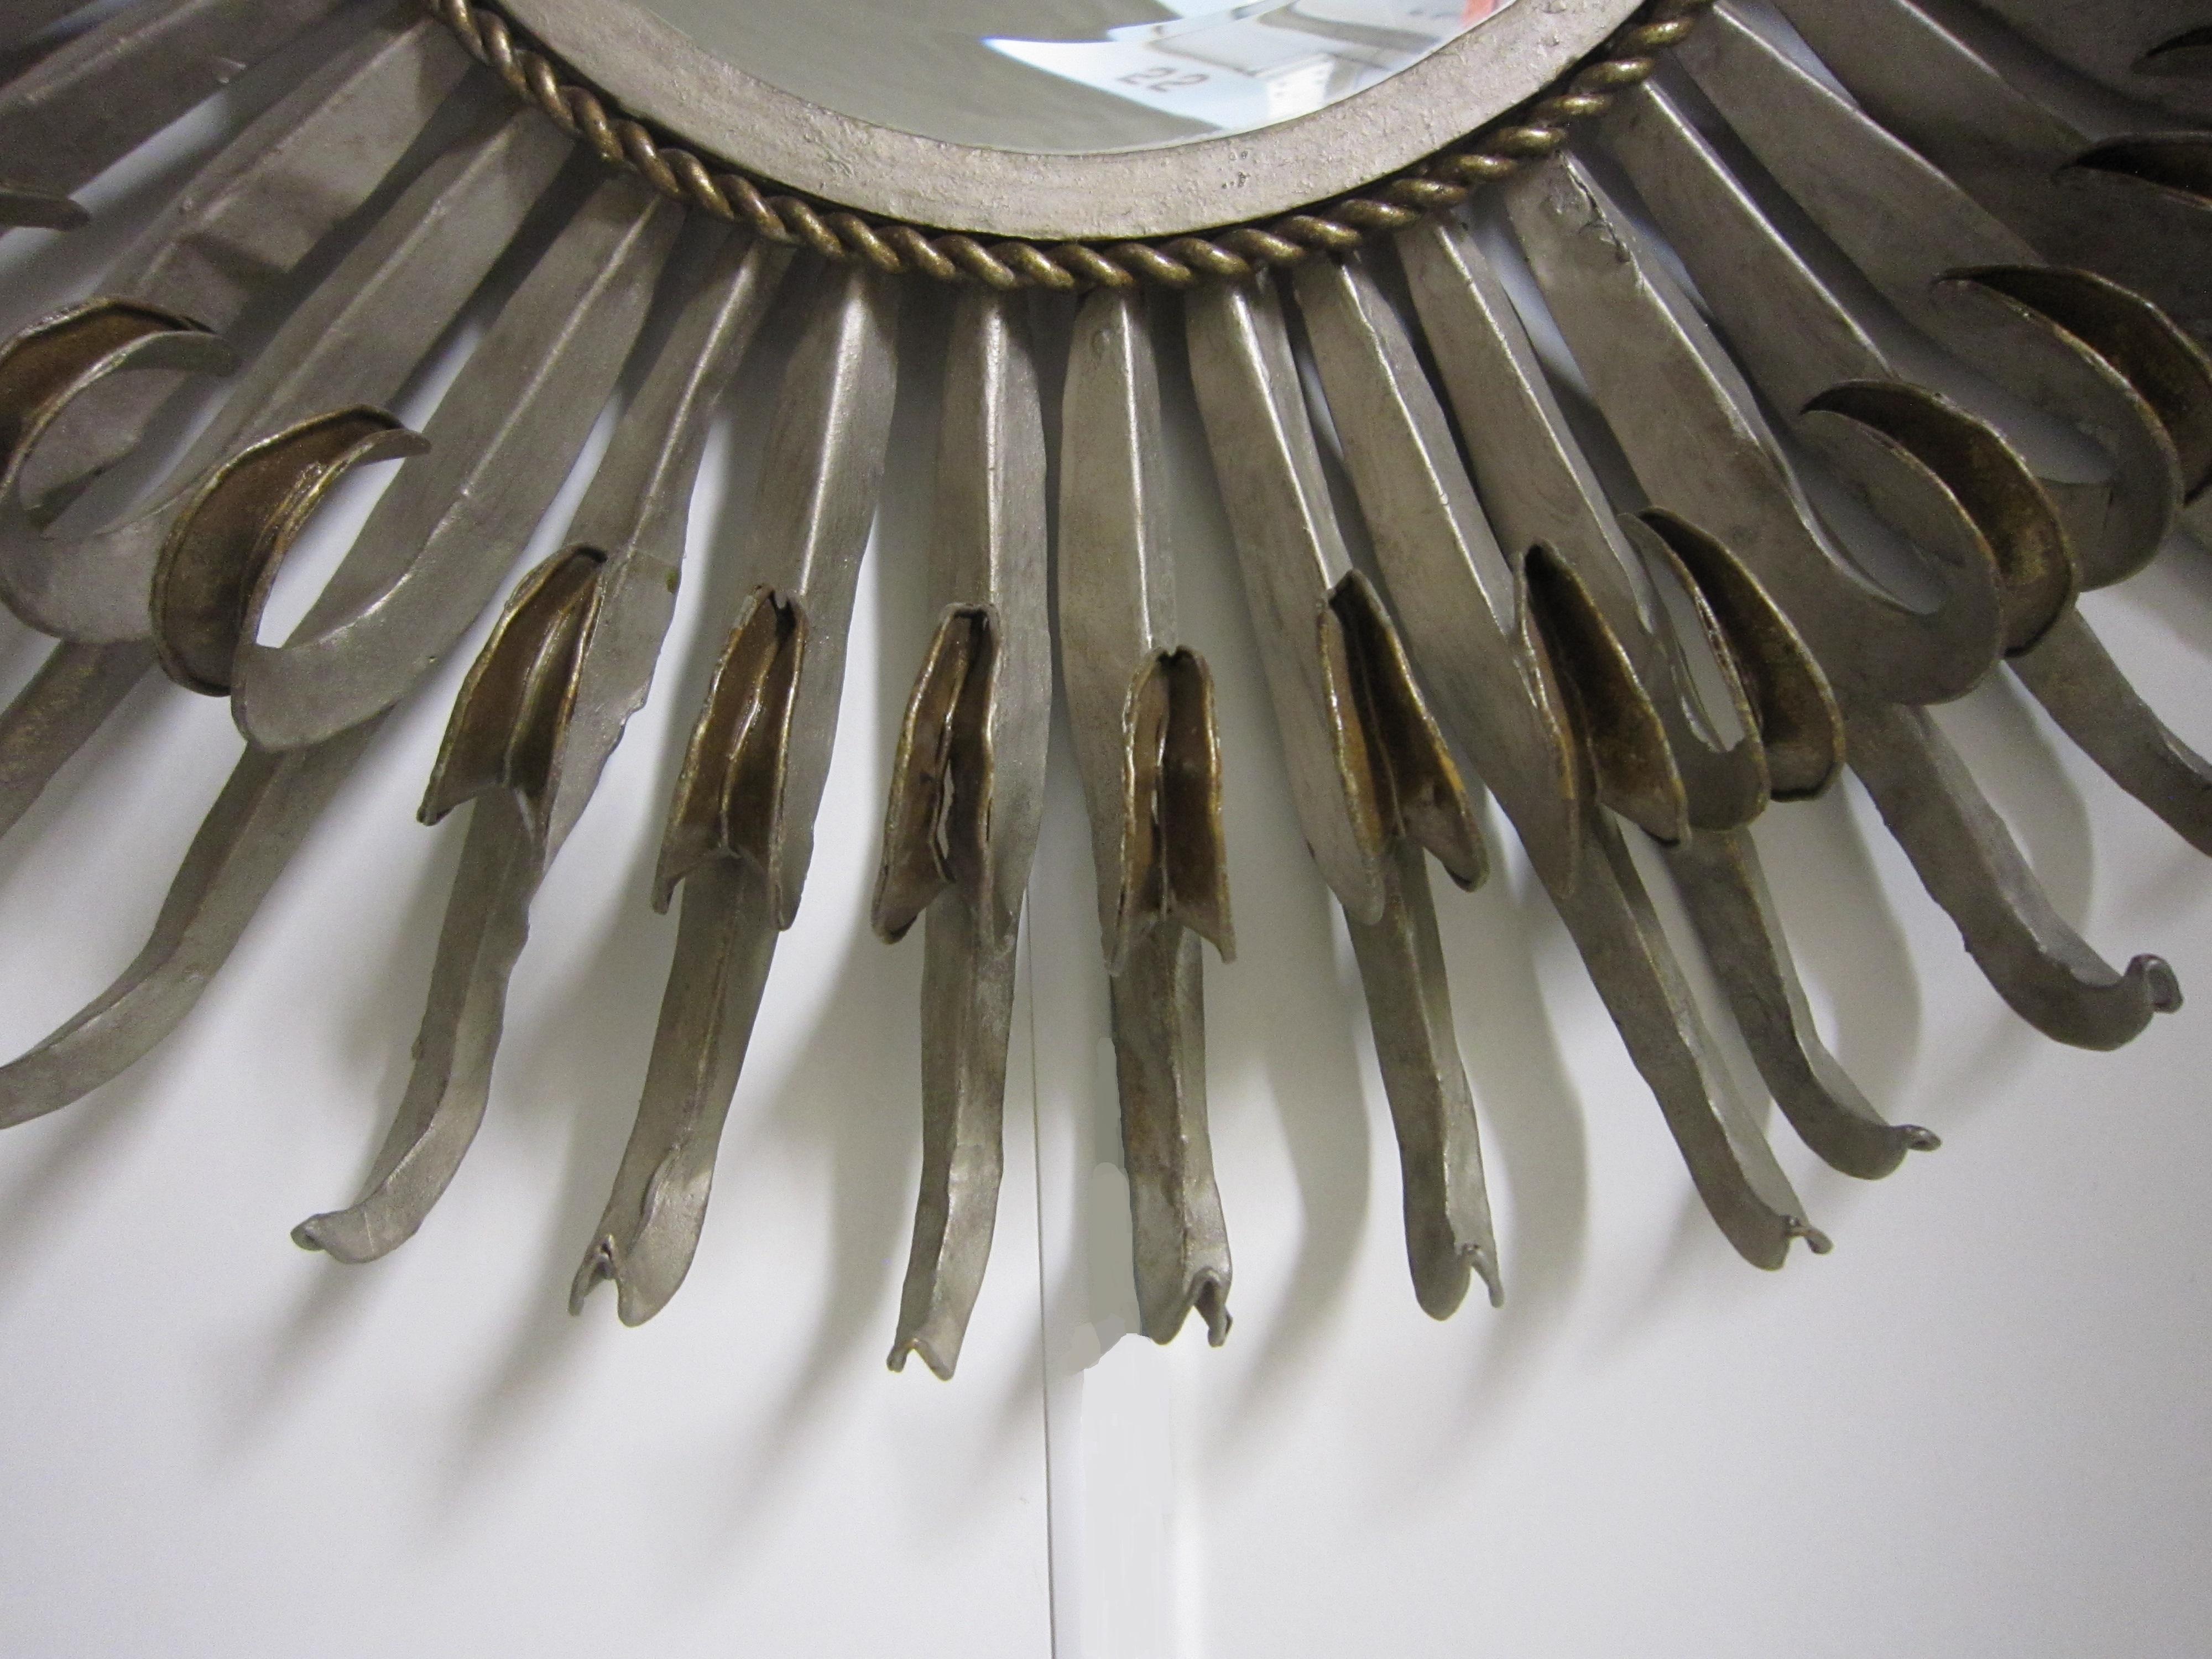 Pair of Midcentury Sunburst / Soleil Mirrors, Silver with Golden Bronze Accents In Good Condition For Sale In New York City, NY